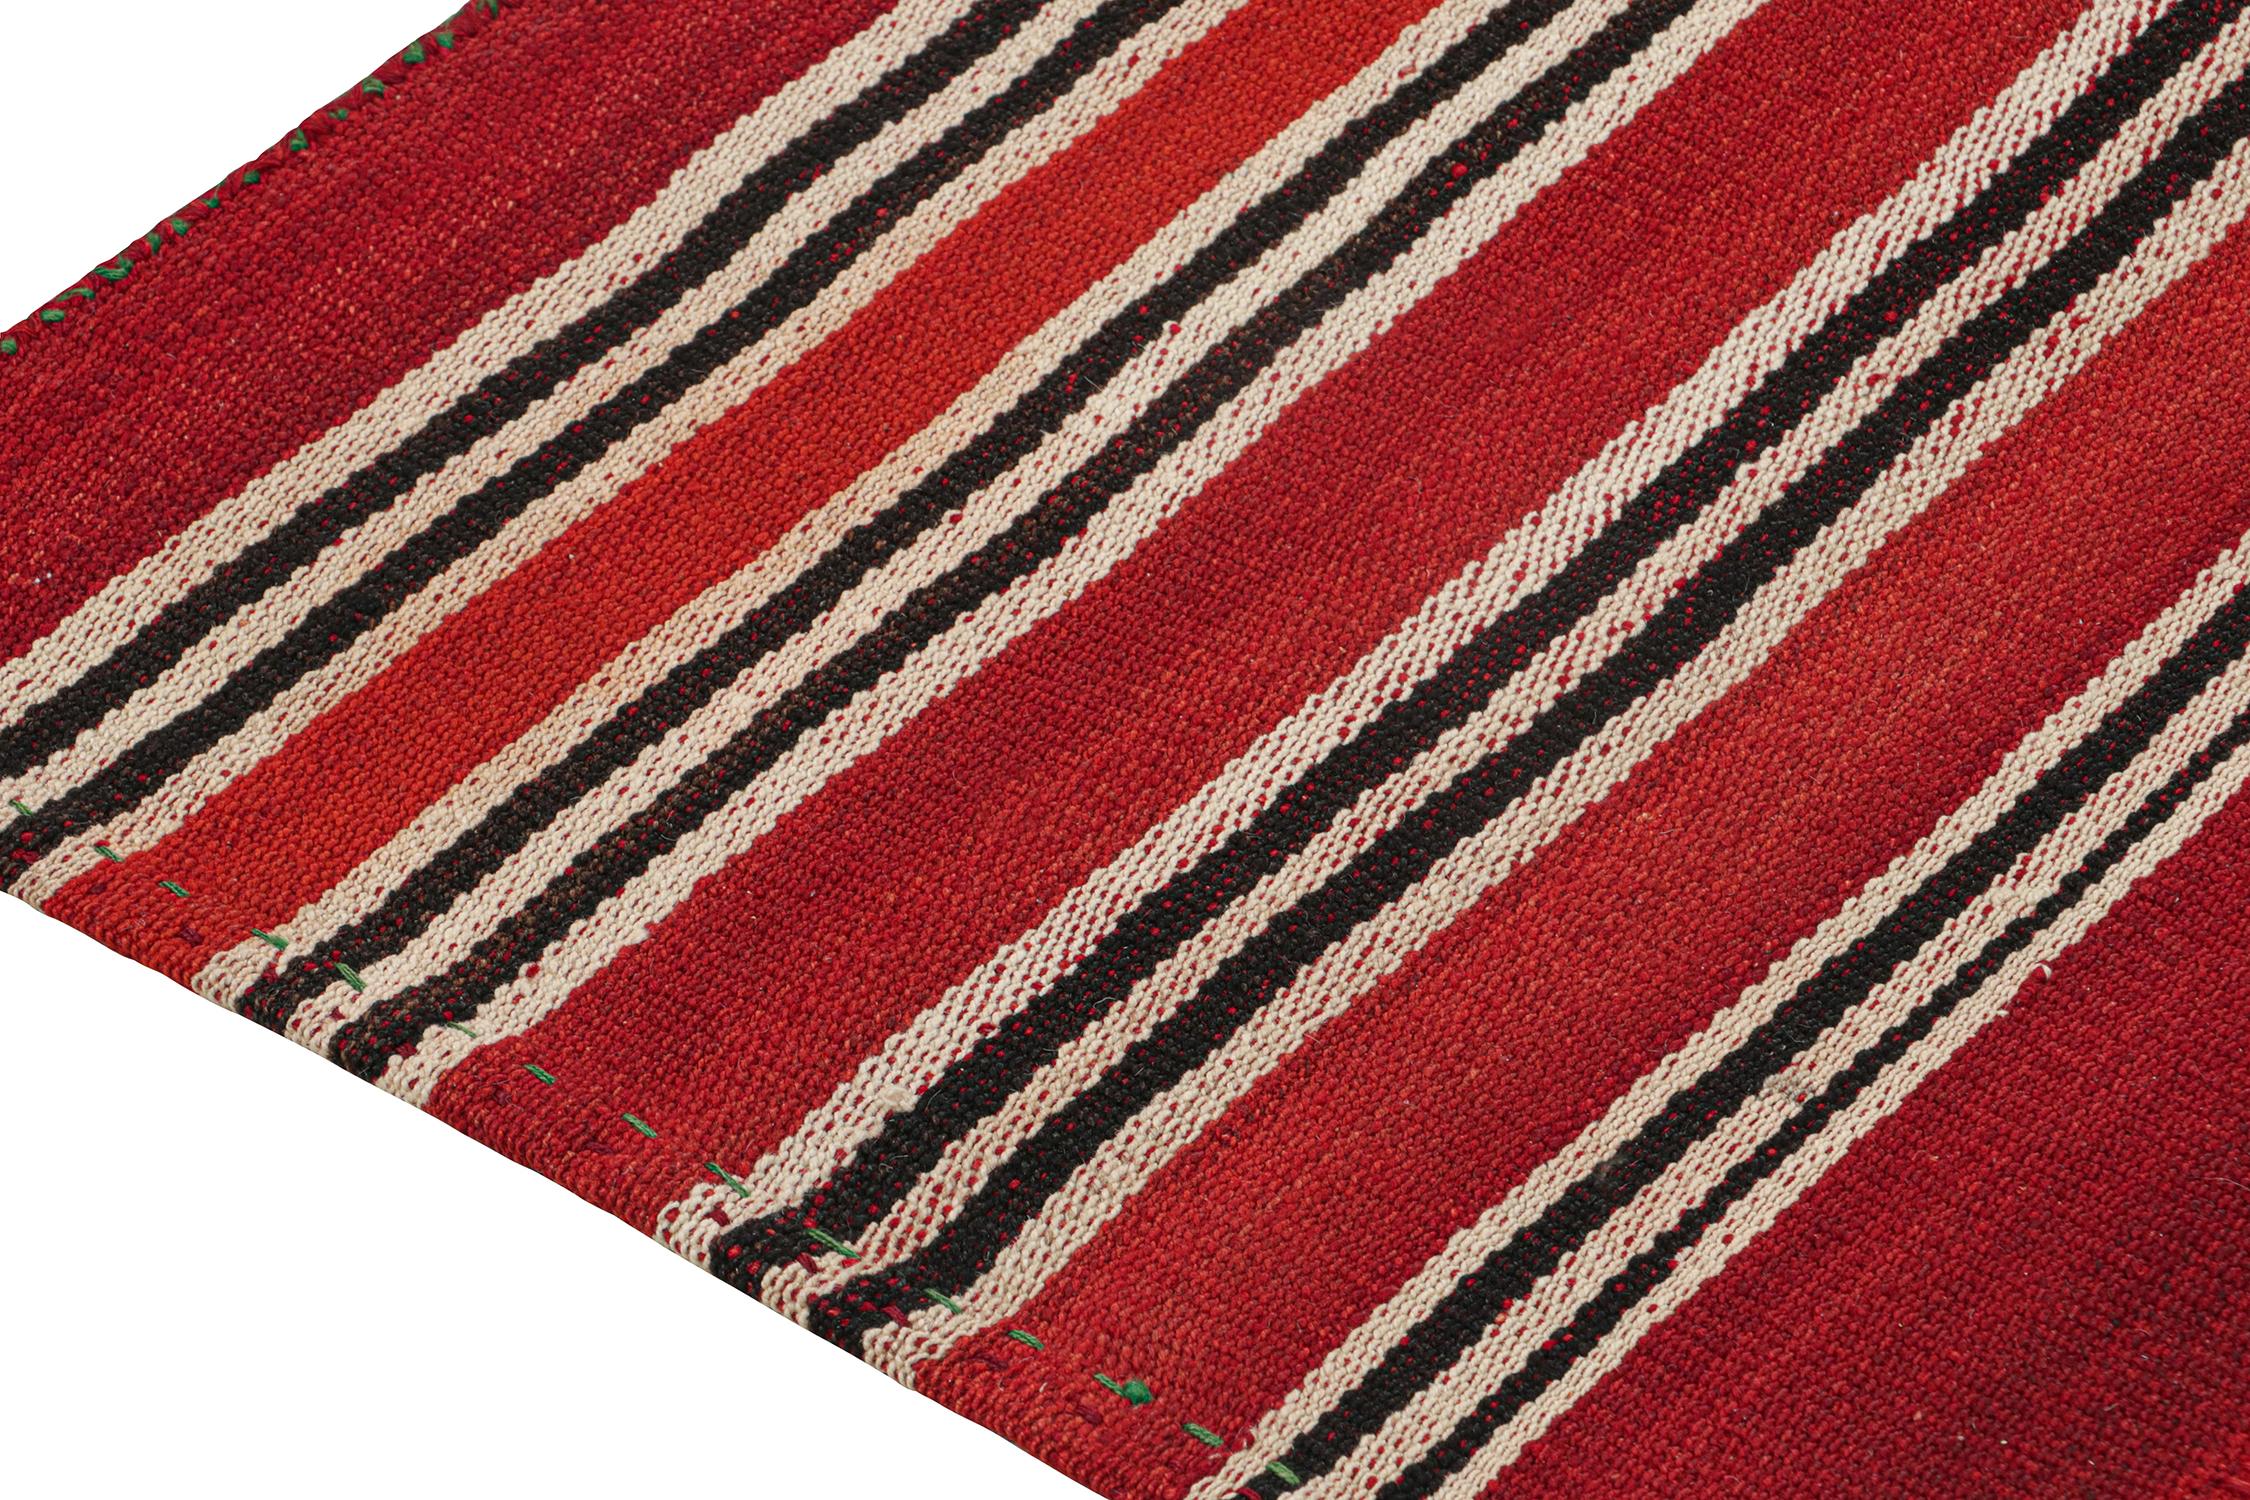 Vintage Persian Kilim with Red, Black and Off-White Stripes by Rug & Kilim In Good Condition For Sale In Long Island City, NY